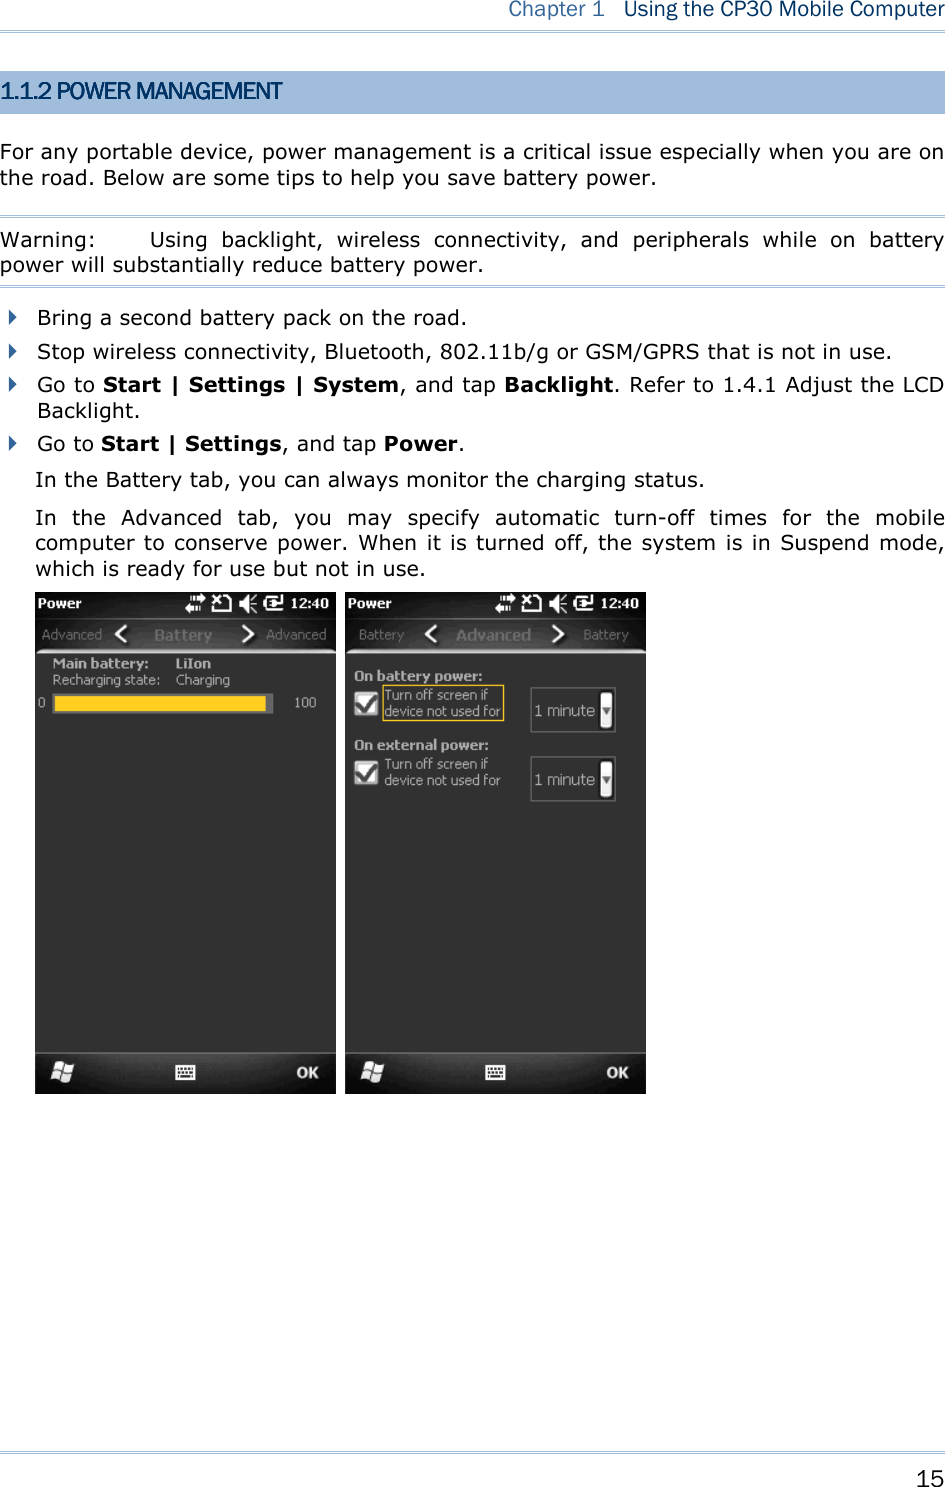    15   Chapter 1   Using the CP30 Mobile Computer 1.1.1.1.1.1.1.1.2222    POWER MANAGEMENTPOWER MANAGEMENTPOWER MANAGEMENTPOWER MANAGEMENT    For any portable device, power management is a critical issue especially when you are on the road. Below are some tips to help you save battery power. Warning:  Using  backlight,  wireless  connectivity,  and  peripherals  while  on  battery power will substantially reduce battery power.    Bring a second battery pack on the road.  Stop wireless connectivity, Bluetooth, 802.11b/g or GSM/GPRS that is not in use.    Go to Start | Settings | System, and tap Backlight. Refer to 1.4.1 Adjust the LCD Backlight.  Go to Start | Settings, and tap Power. In the Battery tab, you can always monitor the charging status.   In  the  Advanced  tab,  you  may  specify  automatic  turn-off  times  for  the  mobile computer to conserve power. When it is turned off, the system is in Suspend mode, which is ready for use but not in use.            